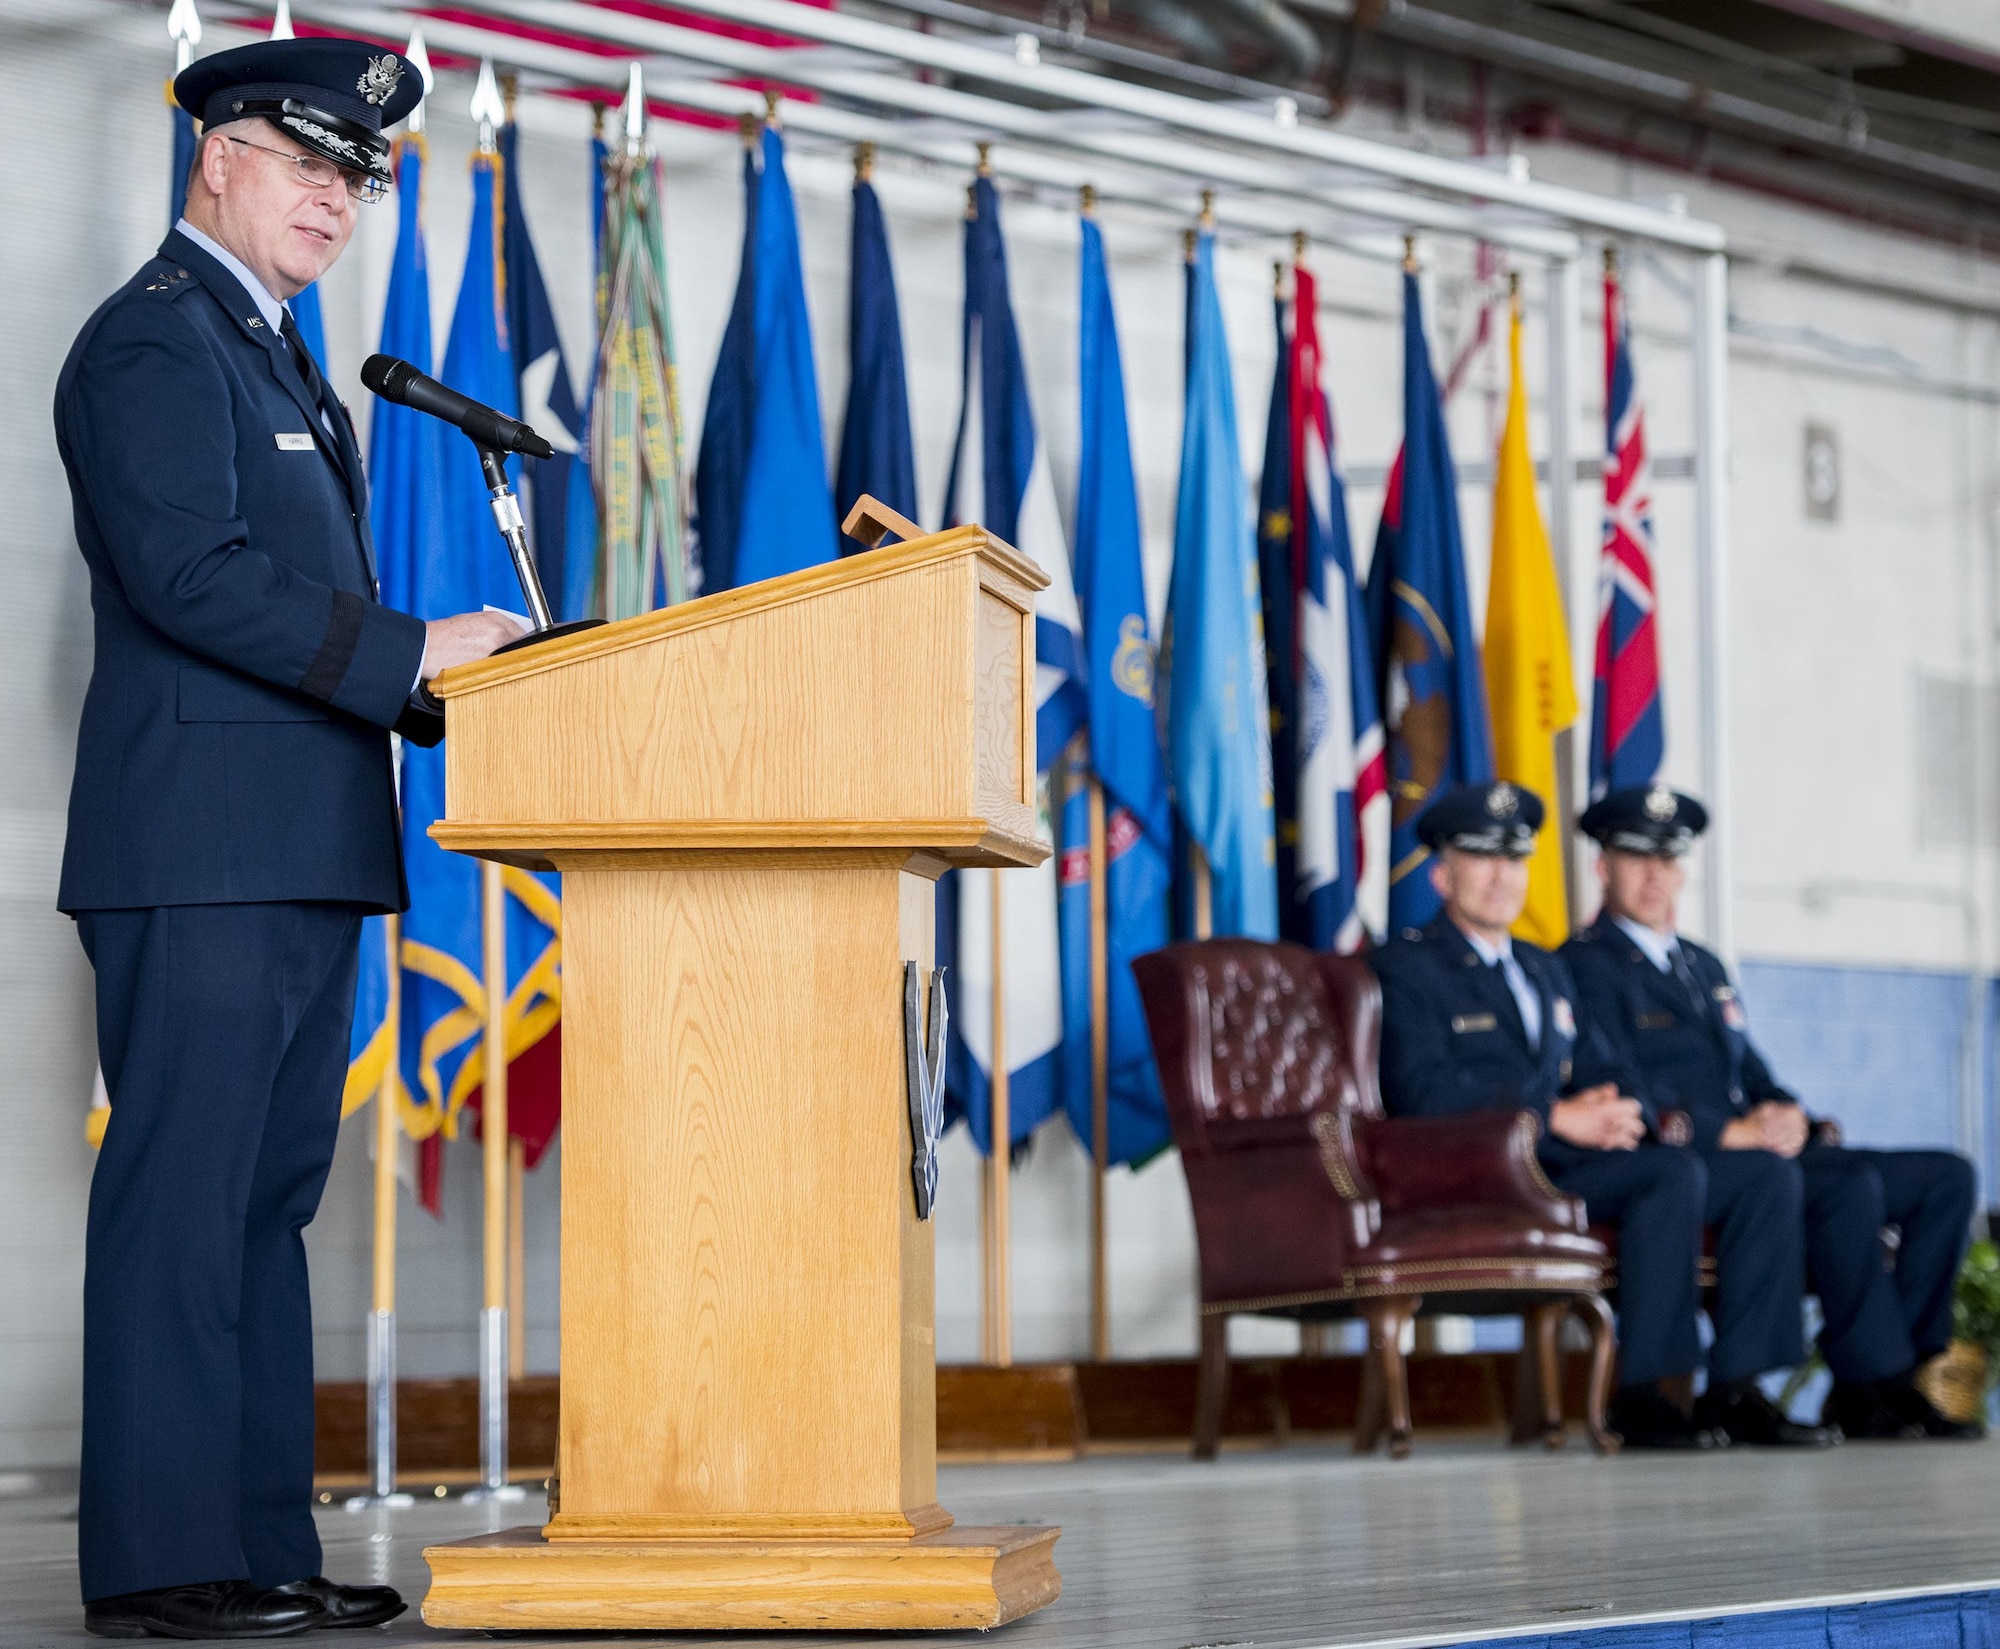 Maj. Gen. David Harris, Air Force Test Center commander, speaks to the audience during the 96th Test Wing change of command ceremony at Eglin Air Force Base, Fla., May 31.  Brig. Gen. Christopher Azzano relinquished command to Brig. Gen. Evan Dertien.  The command position is Dertien’s third assignment to Team Eglin.  (U.S. Air Force photo/Samuel King Jr.)